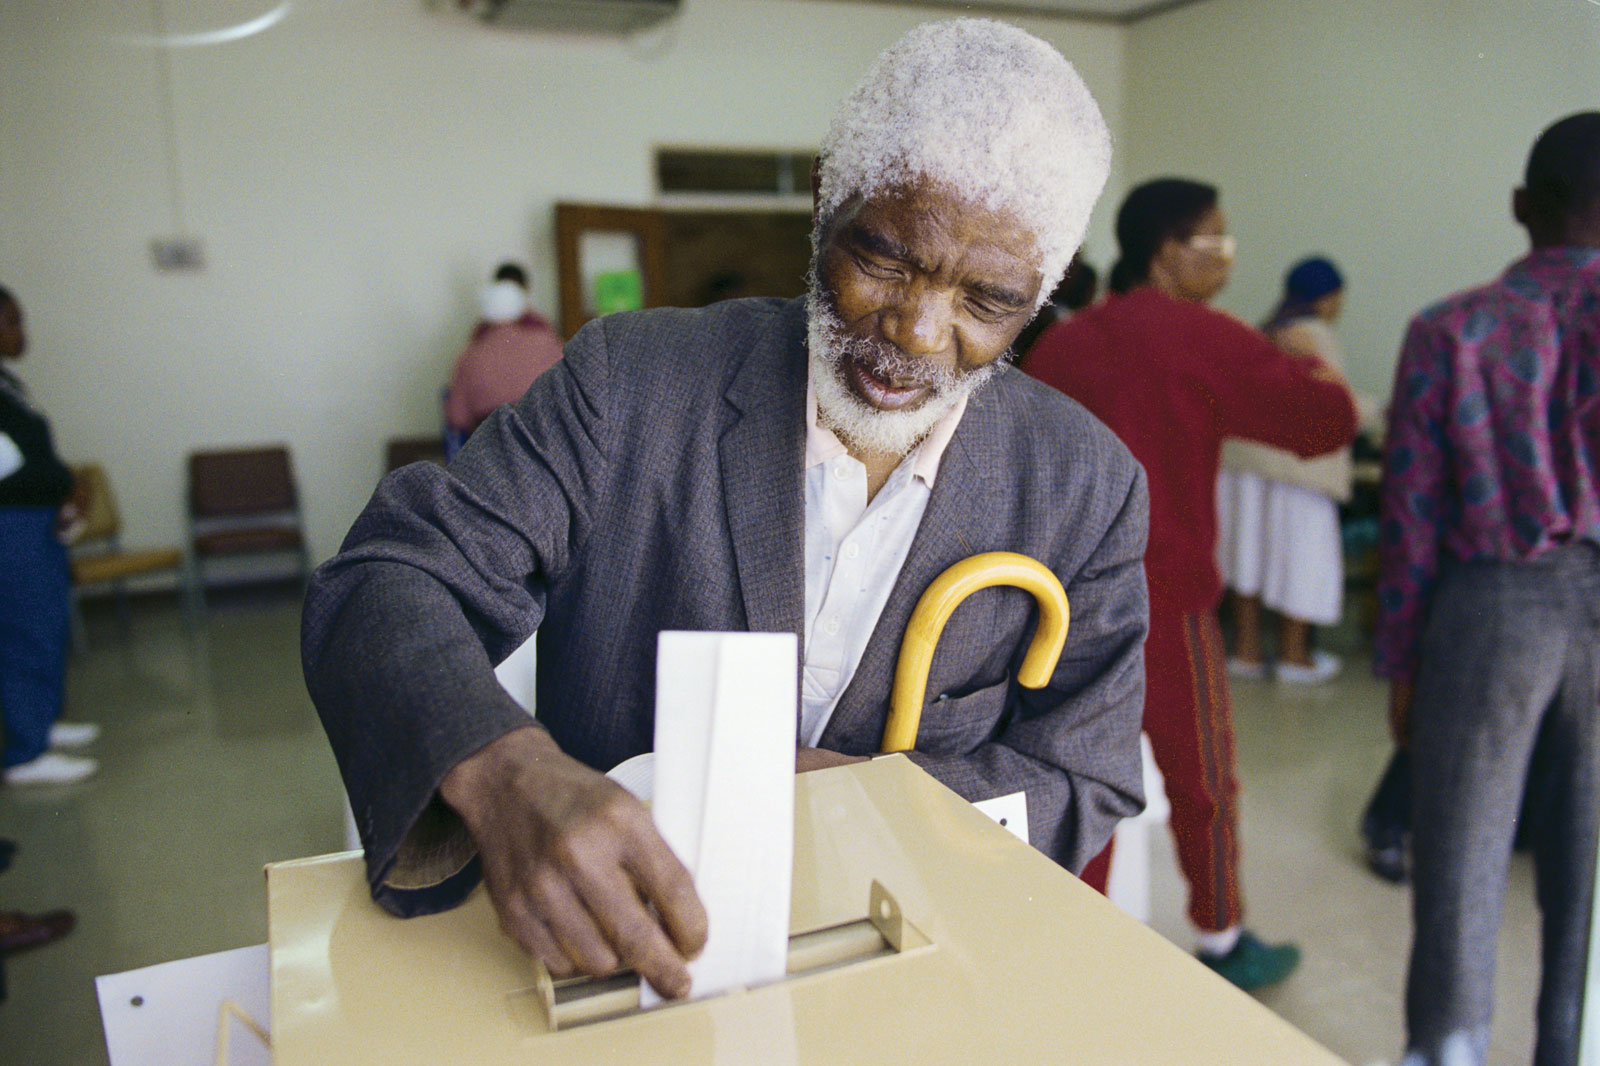 Elections In Africa: Top 5 Predictions For 2014